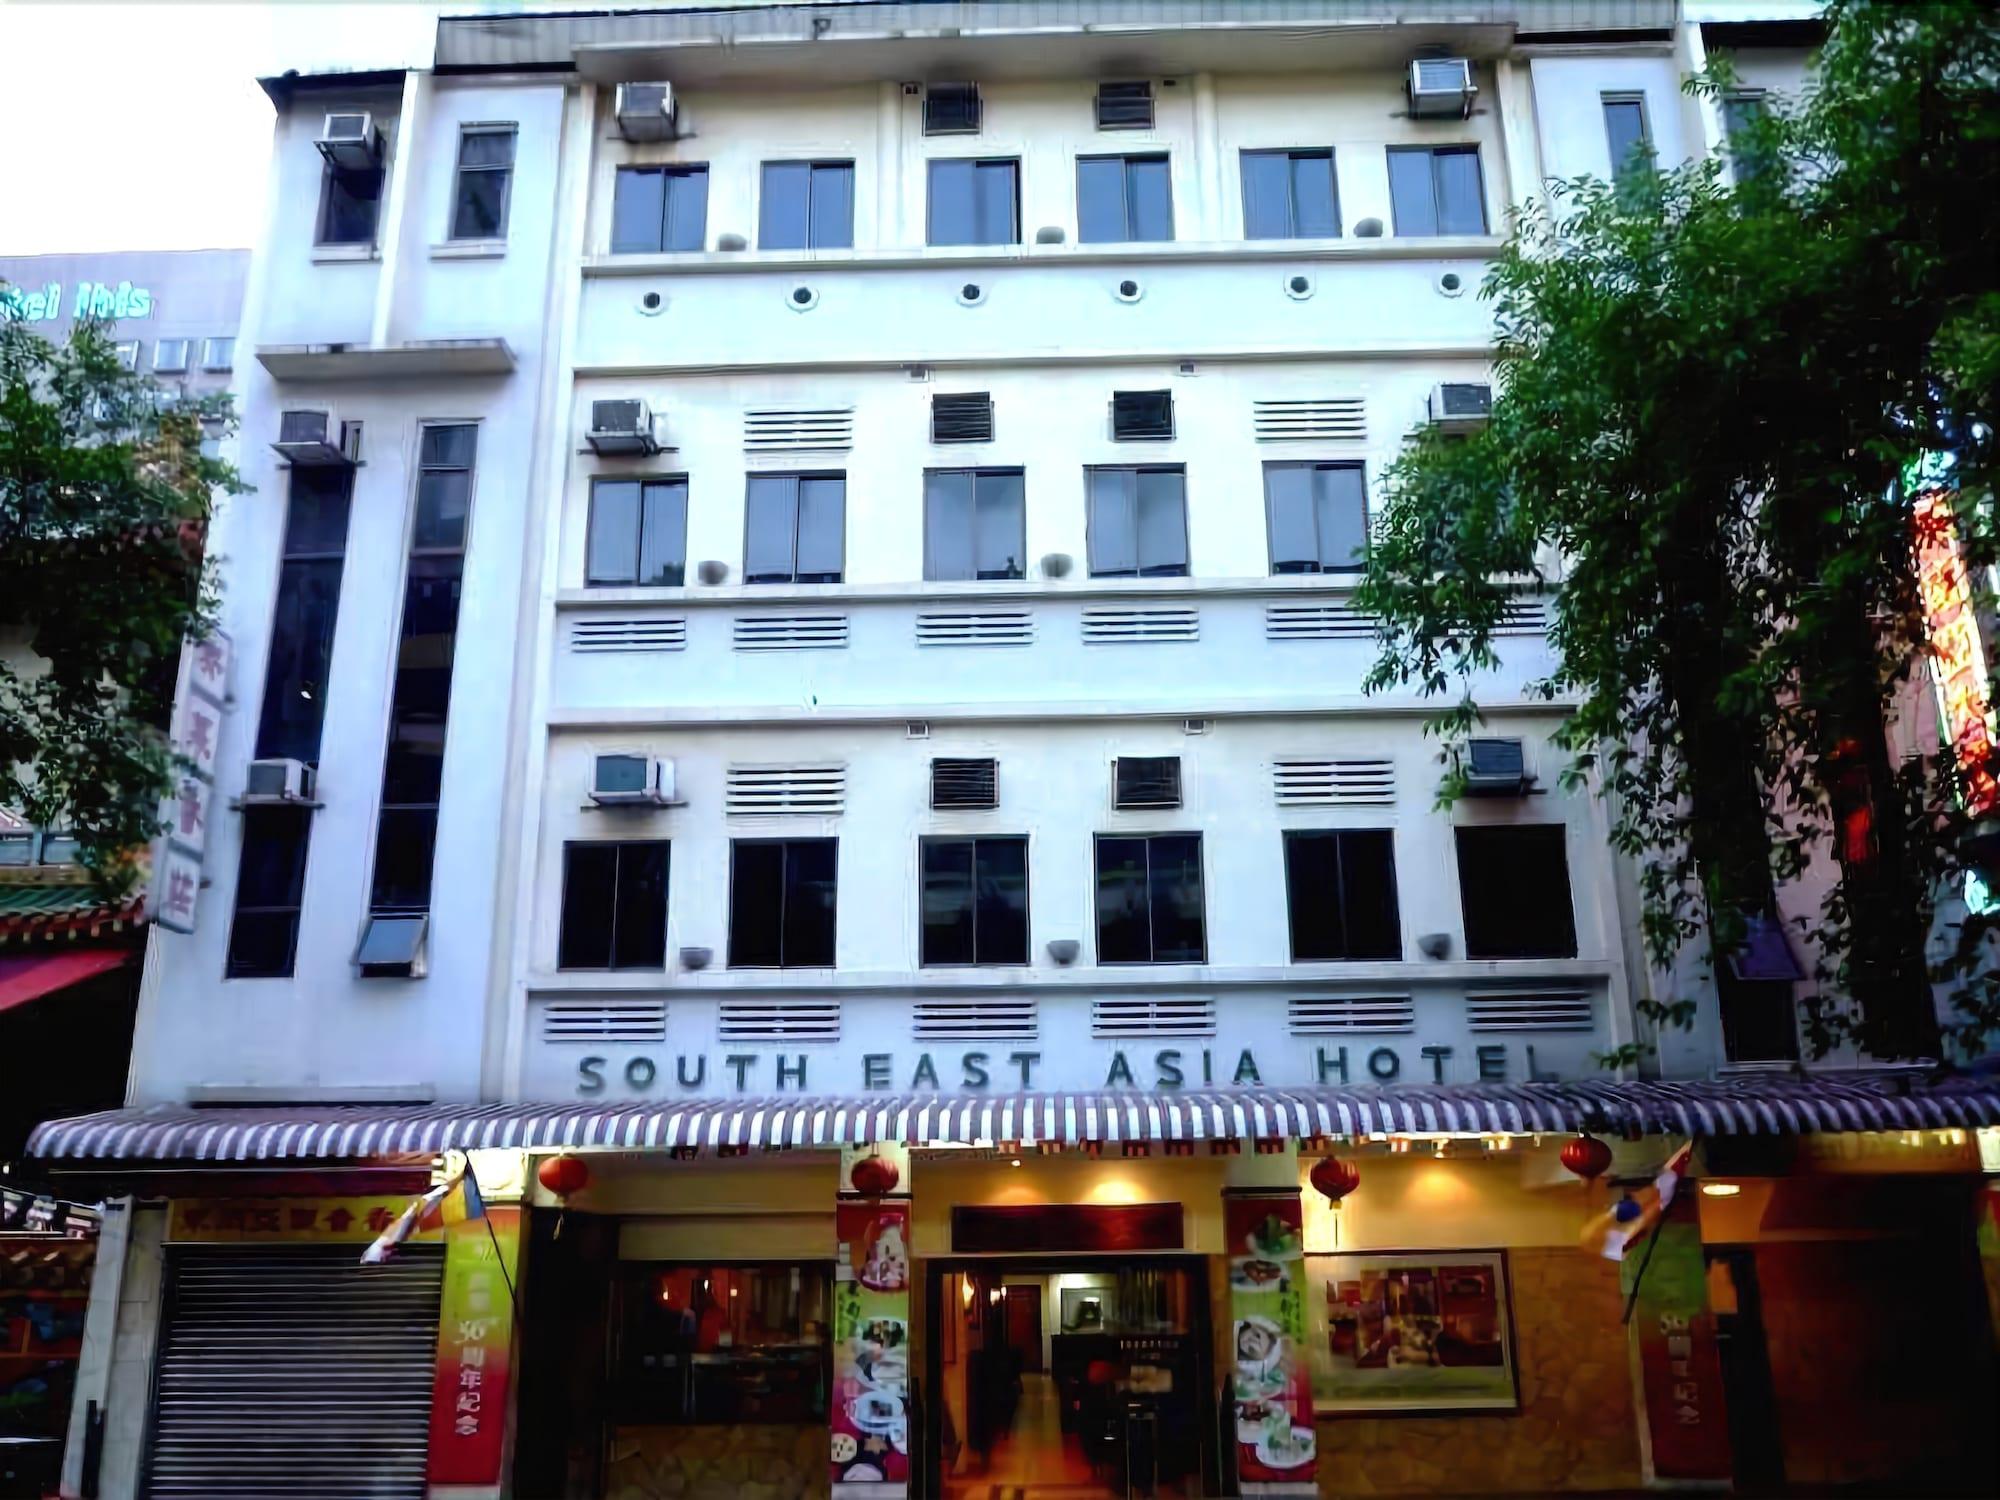 South East Asia Hotel image